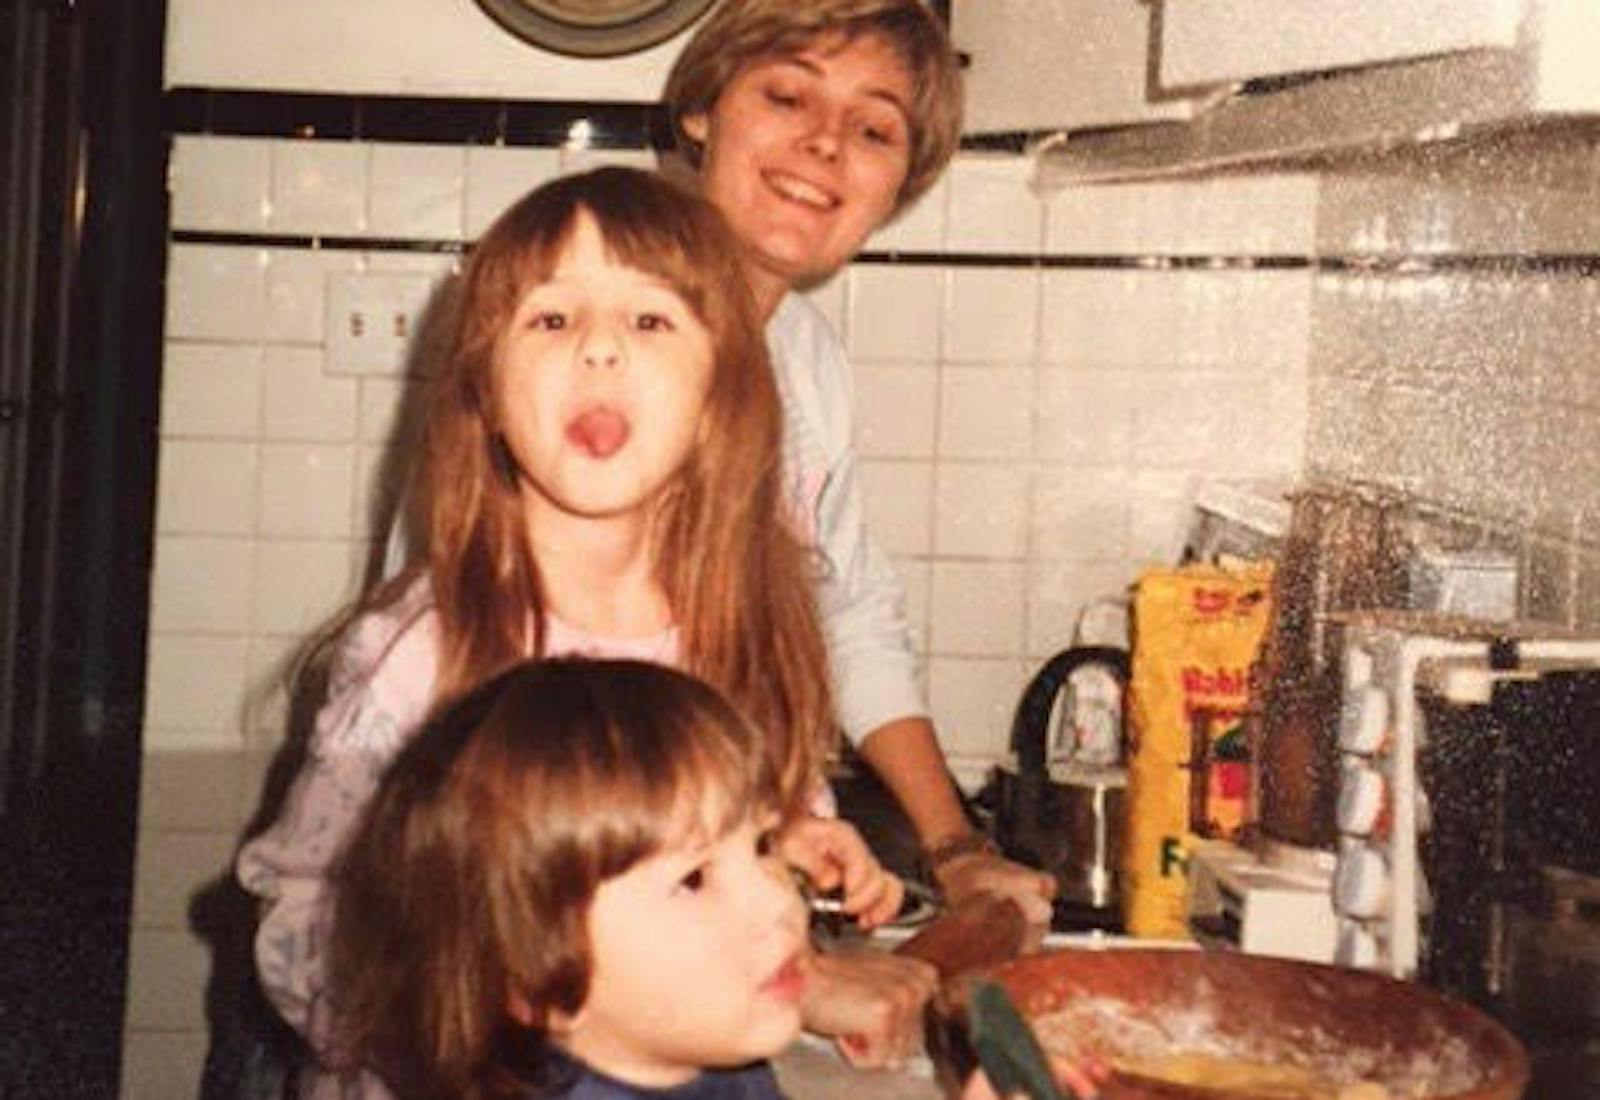 Eden and her sister in the kitchen with their mother.